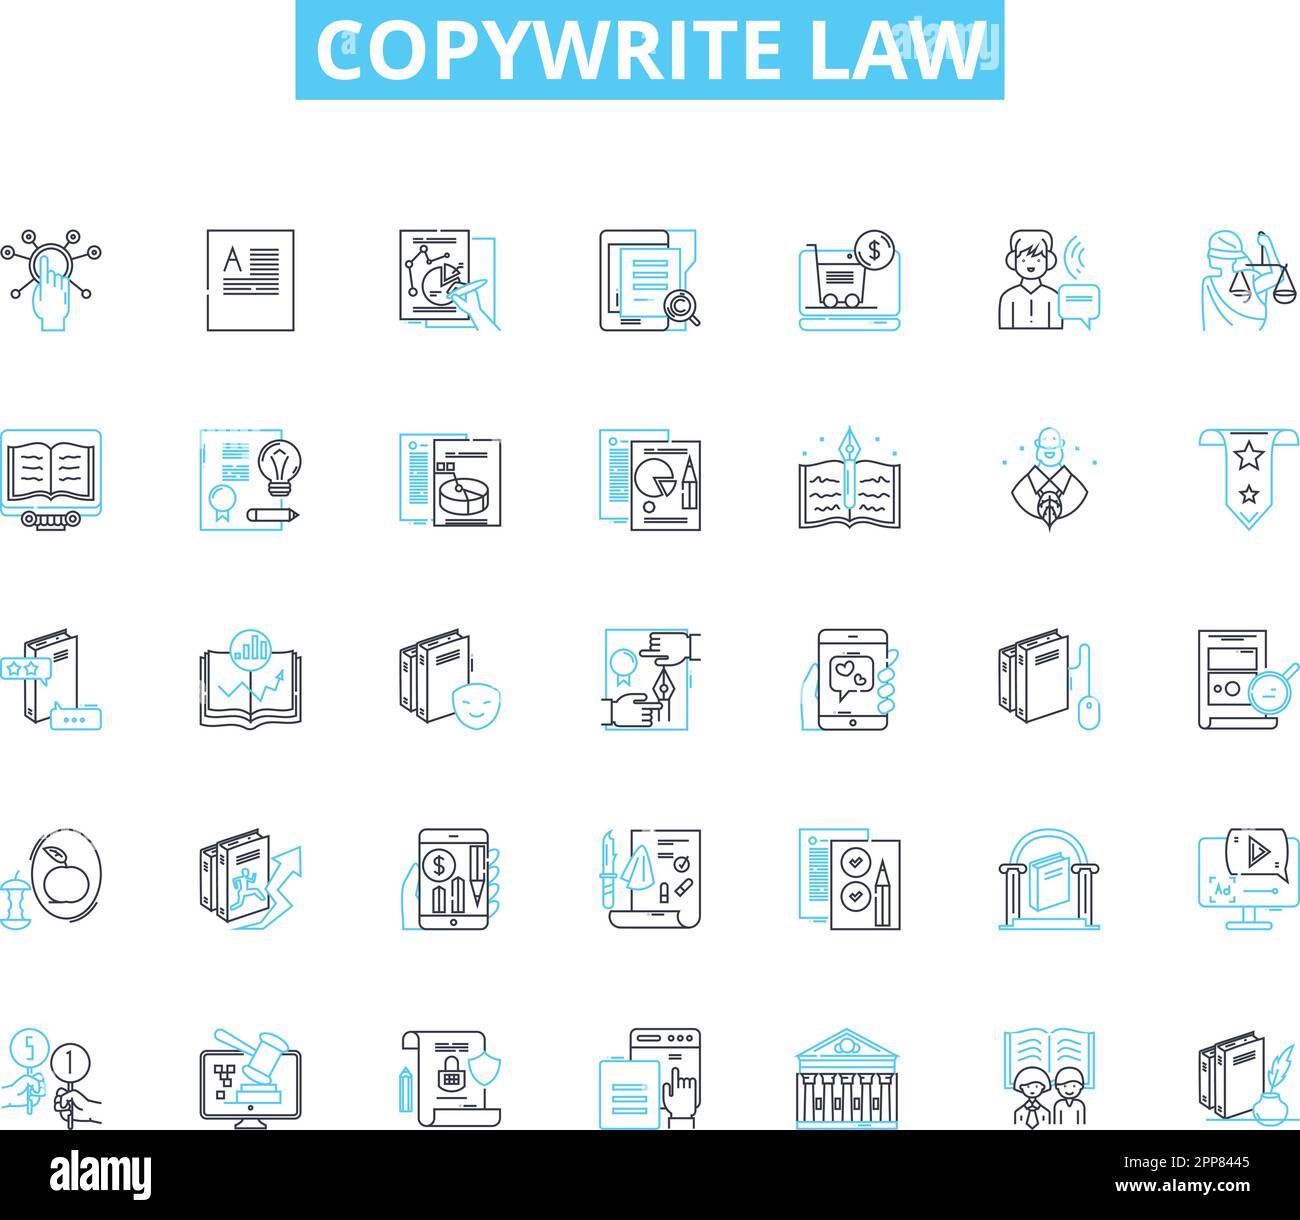 Copywrite law linear icons set. Infringement, Plagiarism, Copyrightability, Trademark, Fair use, Copyright owner, Derivative work line vector and Stock Vector